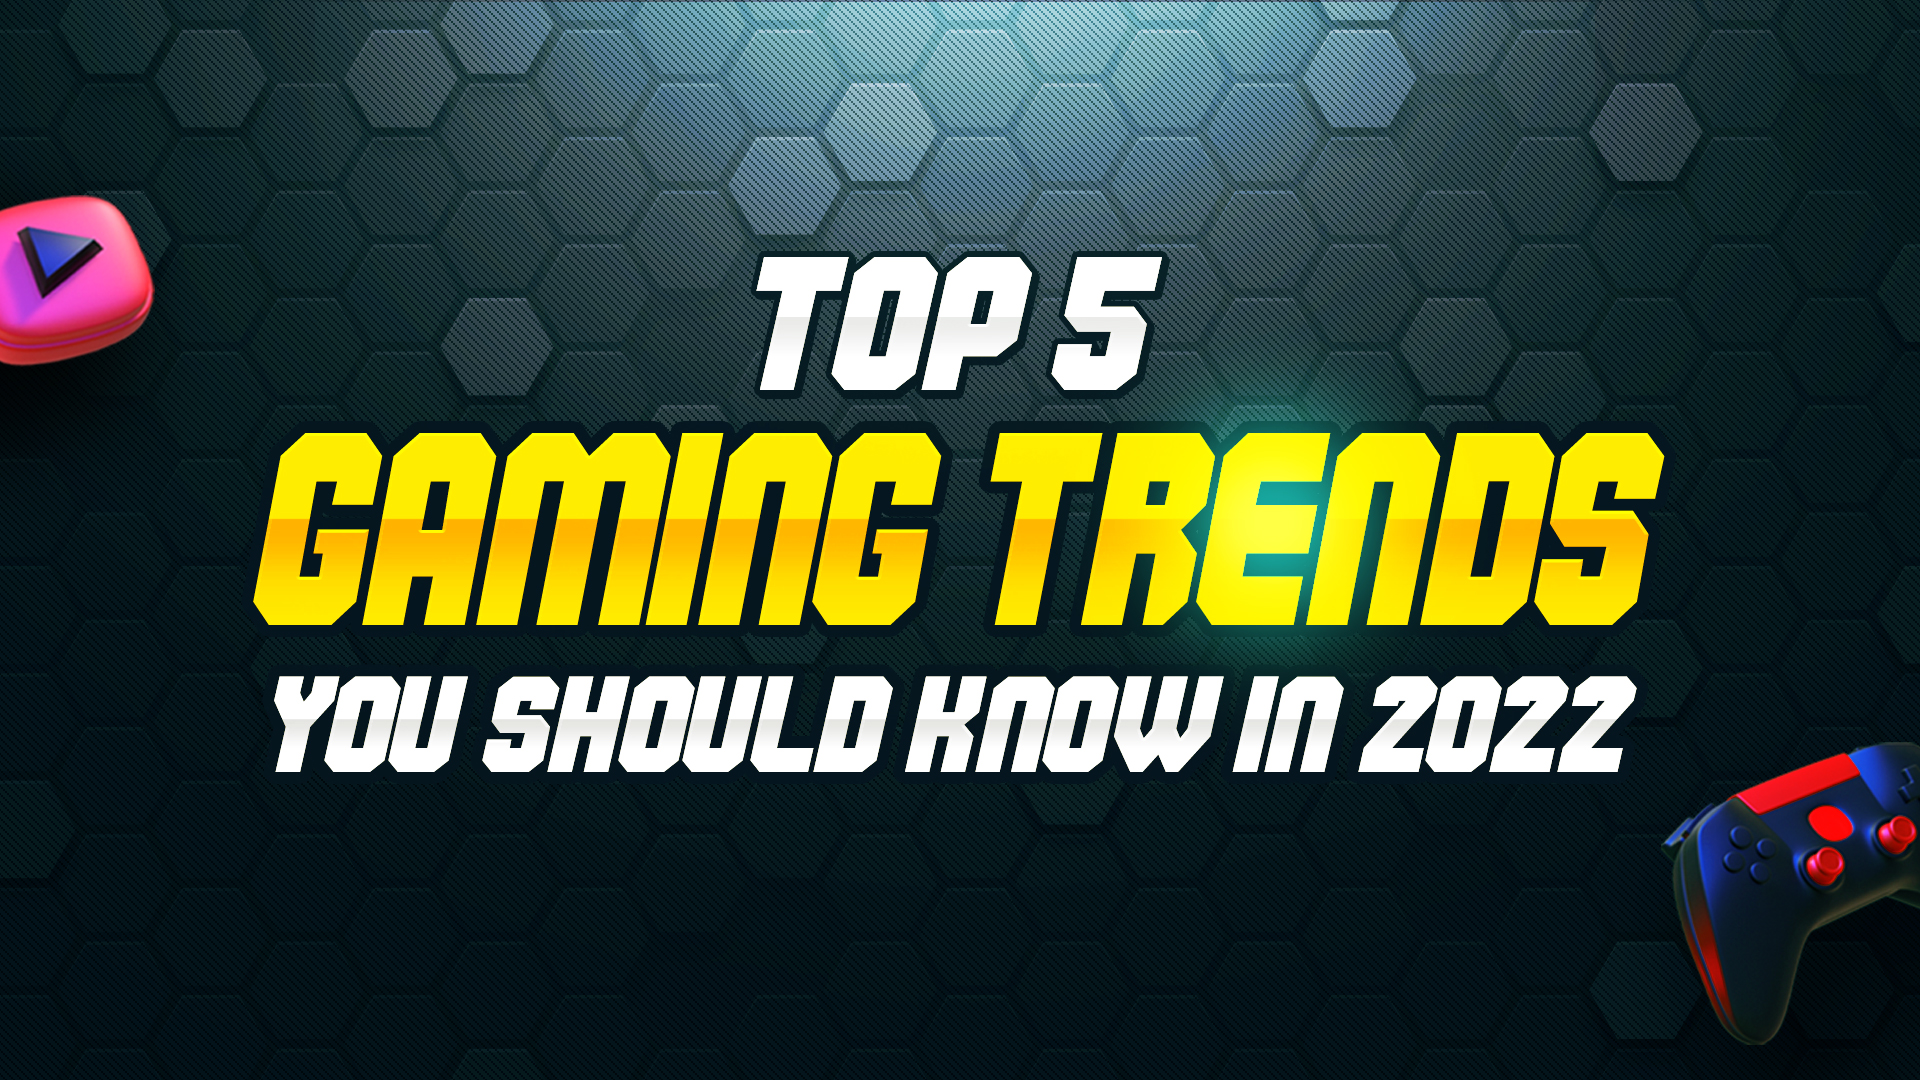 Top Emerging Trends In The Gaming Space